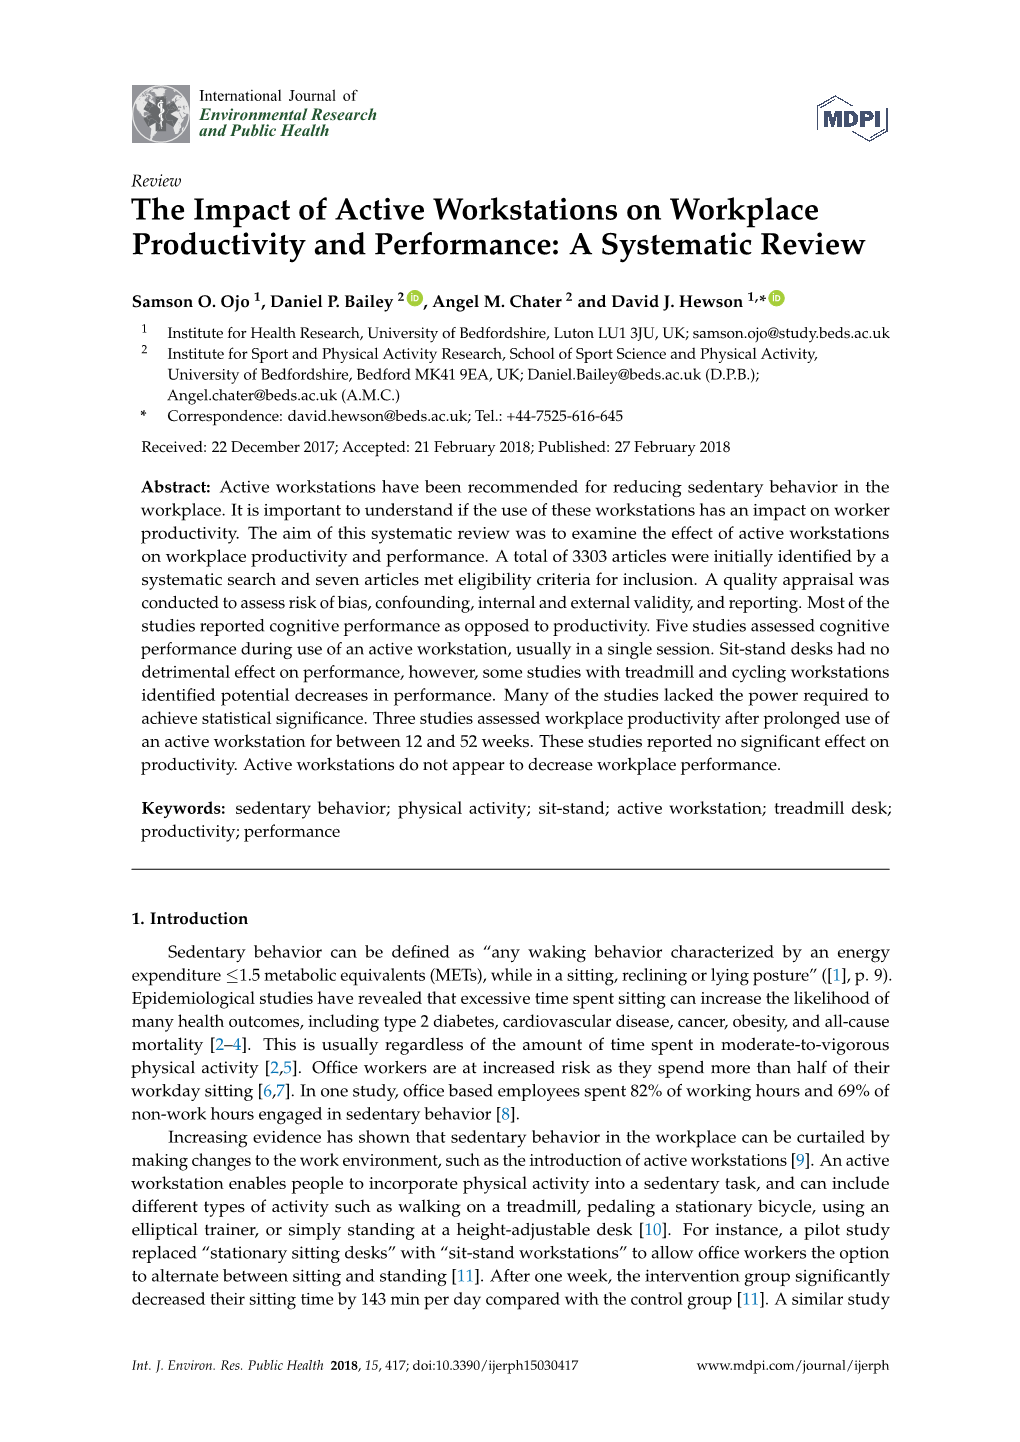 The Impact of Active Workstations on Workplace Productivity and Performance: a Systematic Review